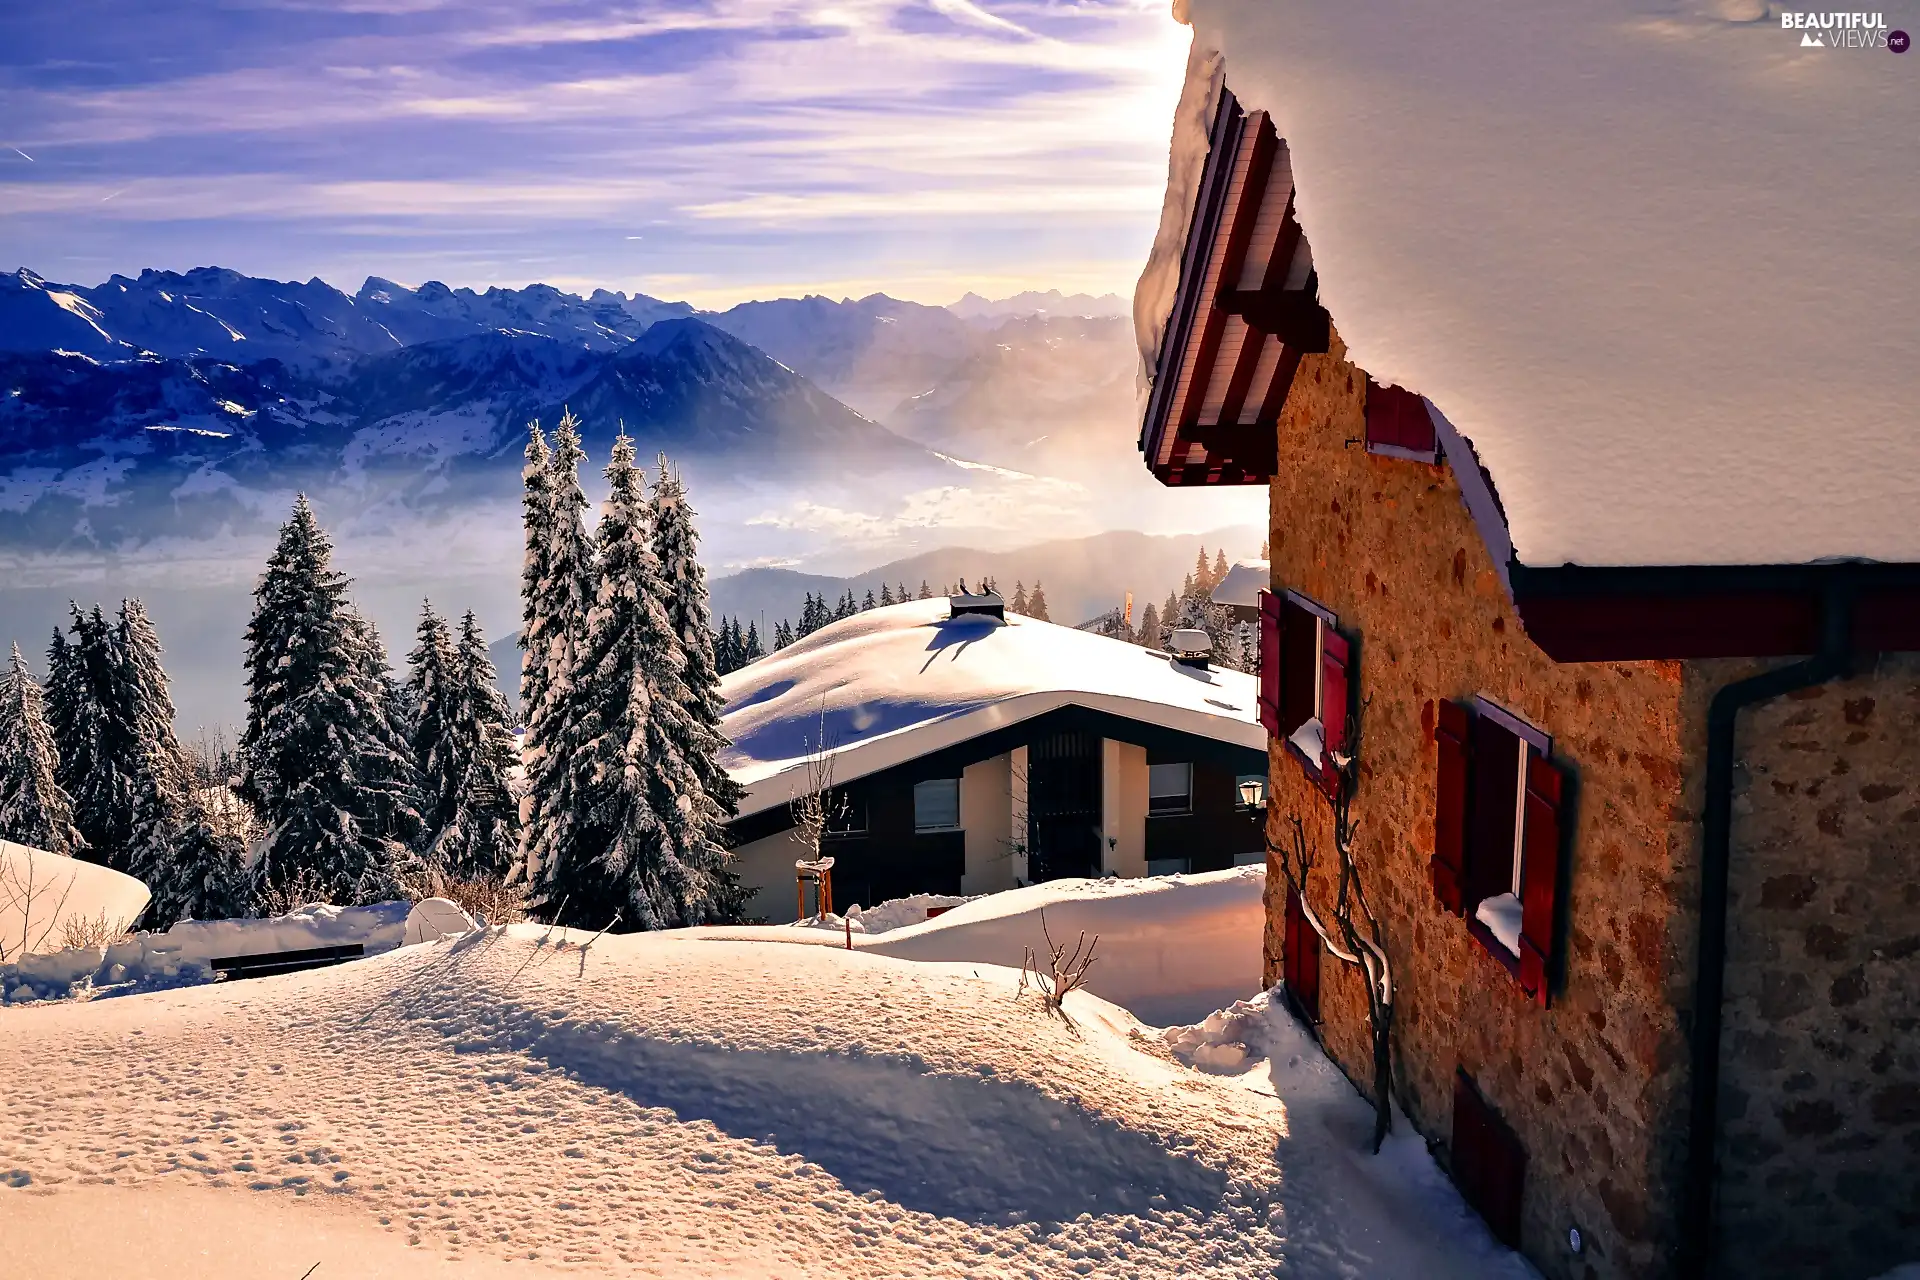 Mountains, Houses, winter